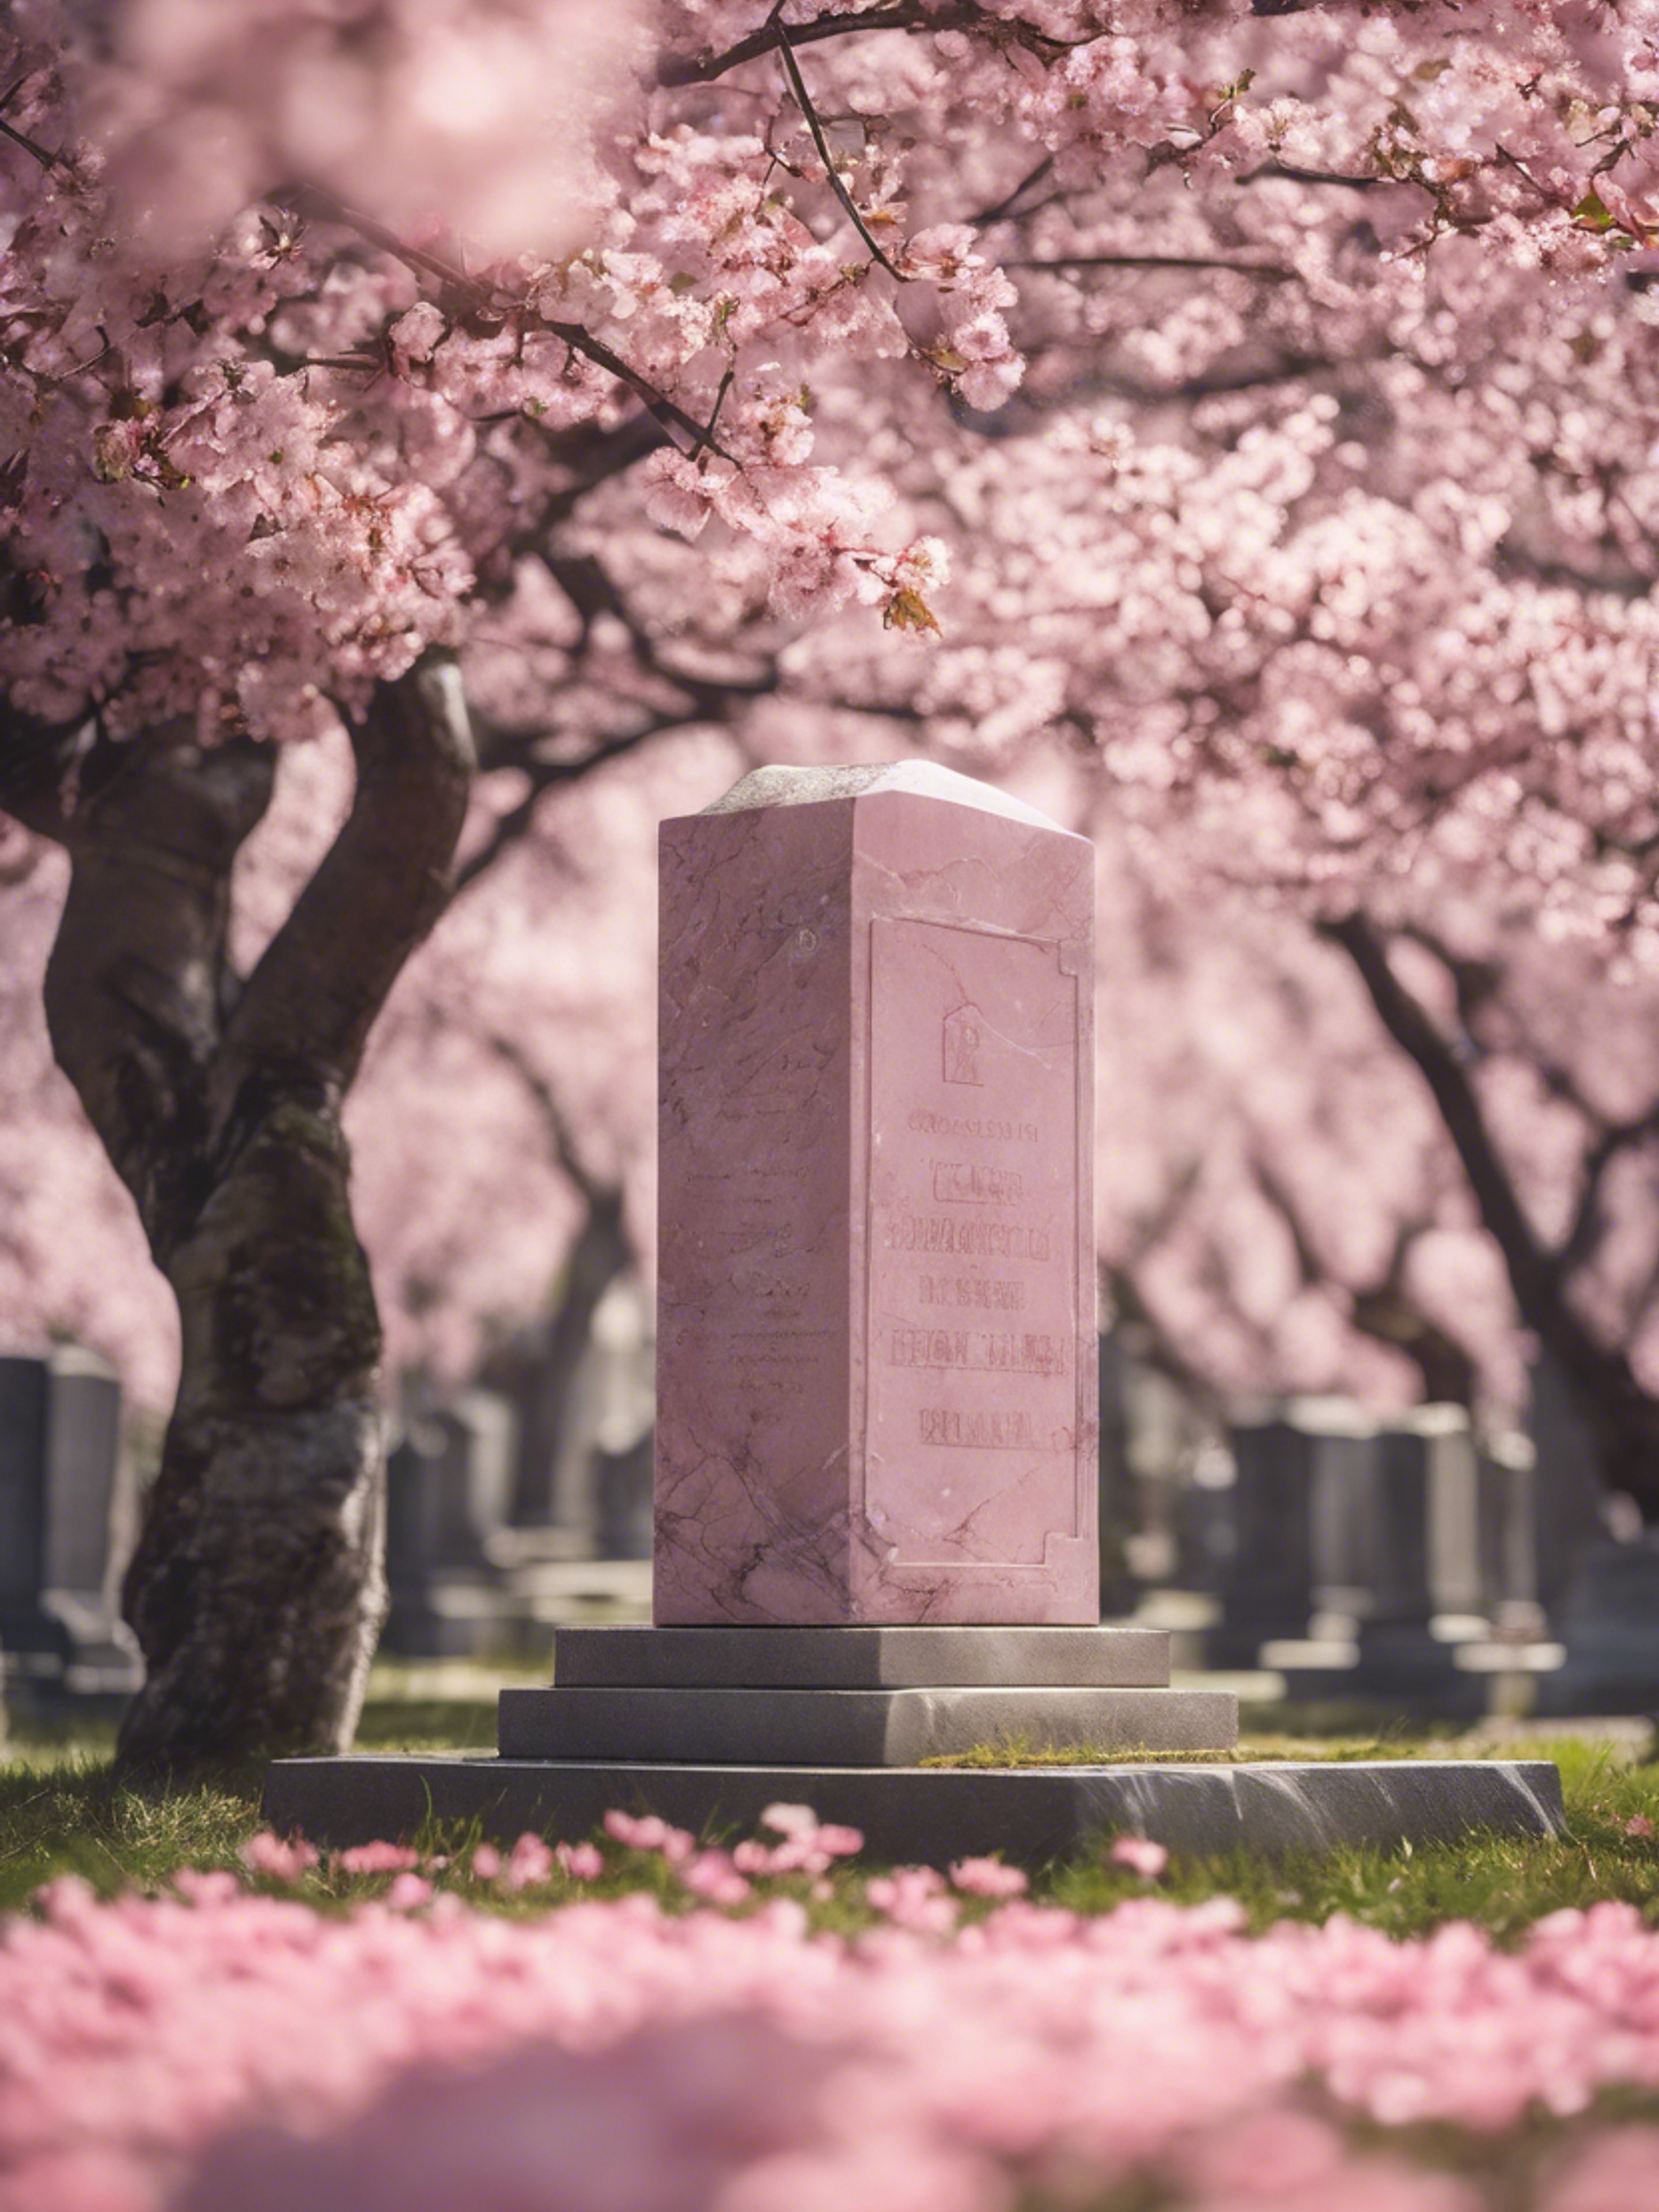 Pink marble headstone surrounded by blooming cherry blossom trees in a tranquil cemetery. Ταπετσαρία[6605d21f56504ecfad88]